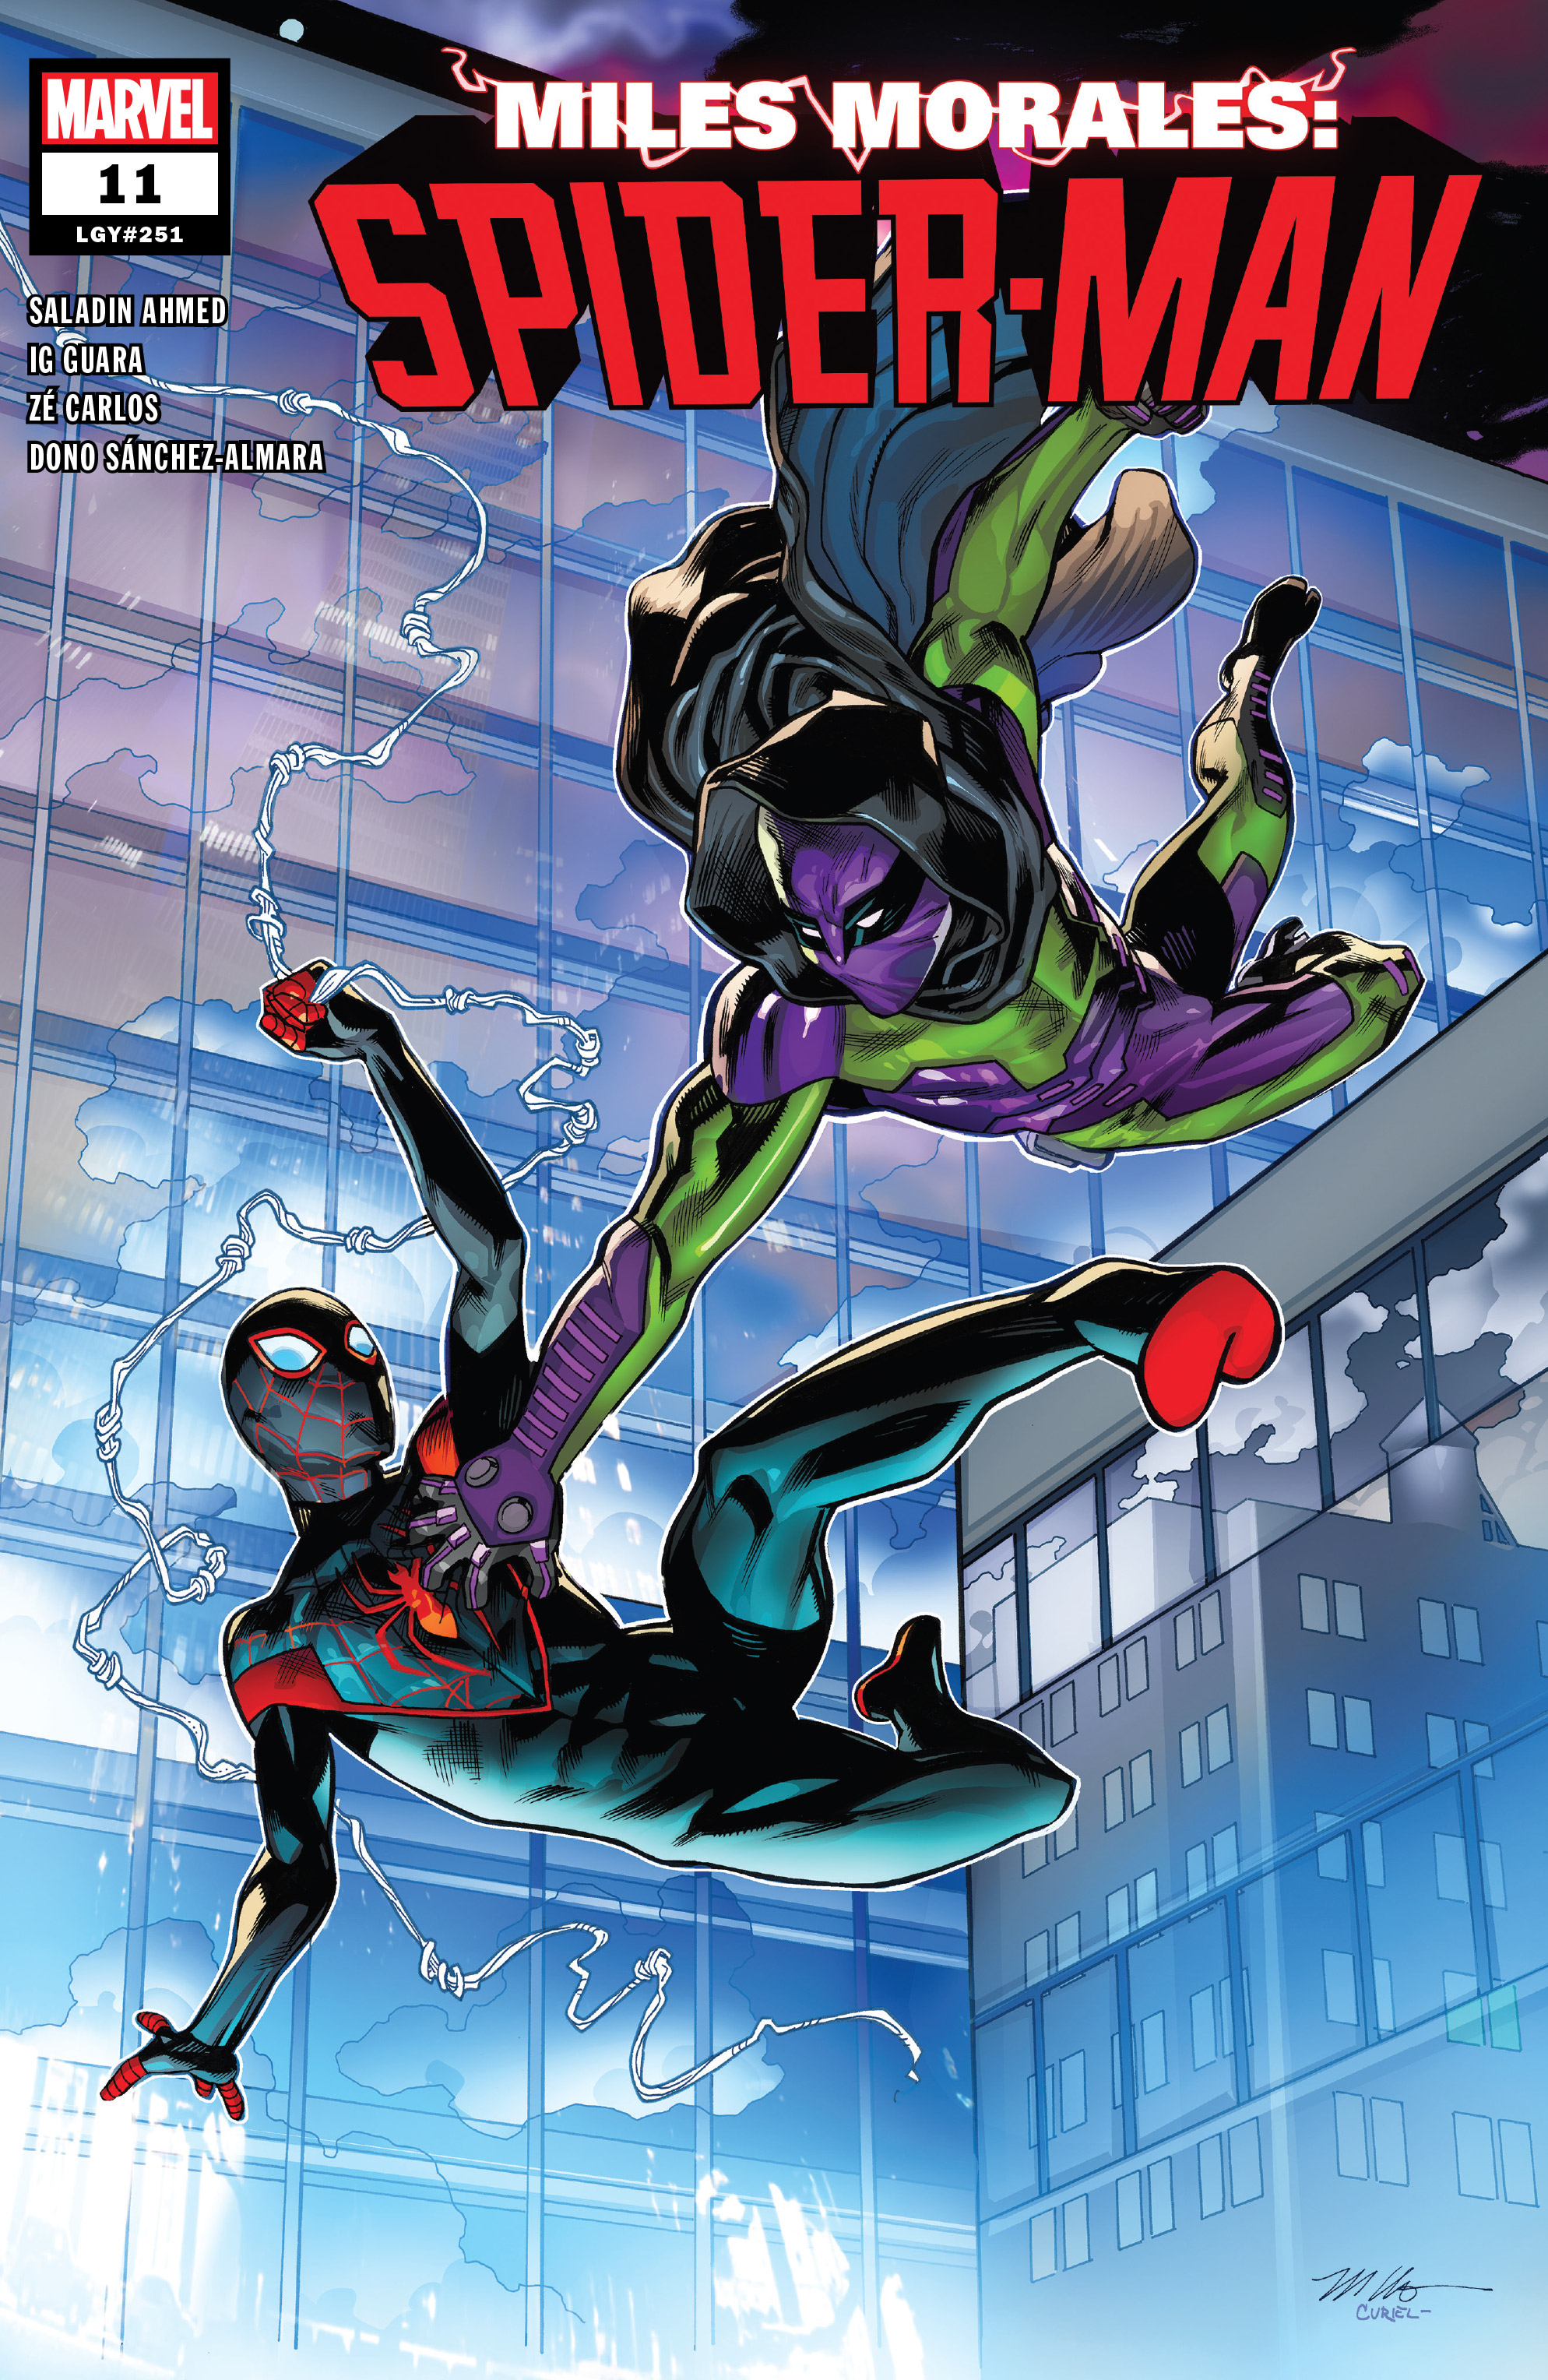 Read online Miles Morales: Spider-Man comic -  Issue #11 - 1